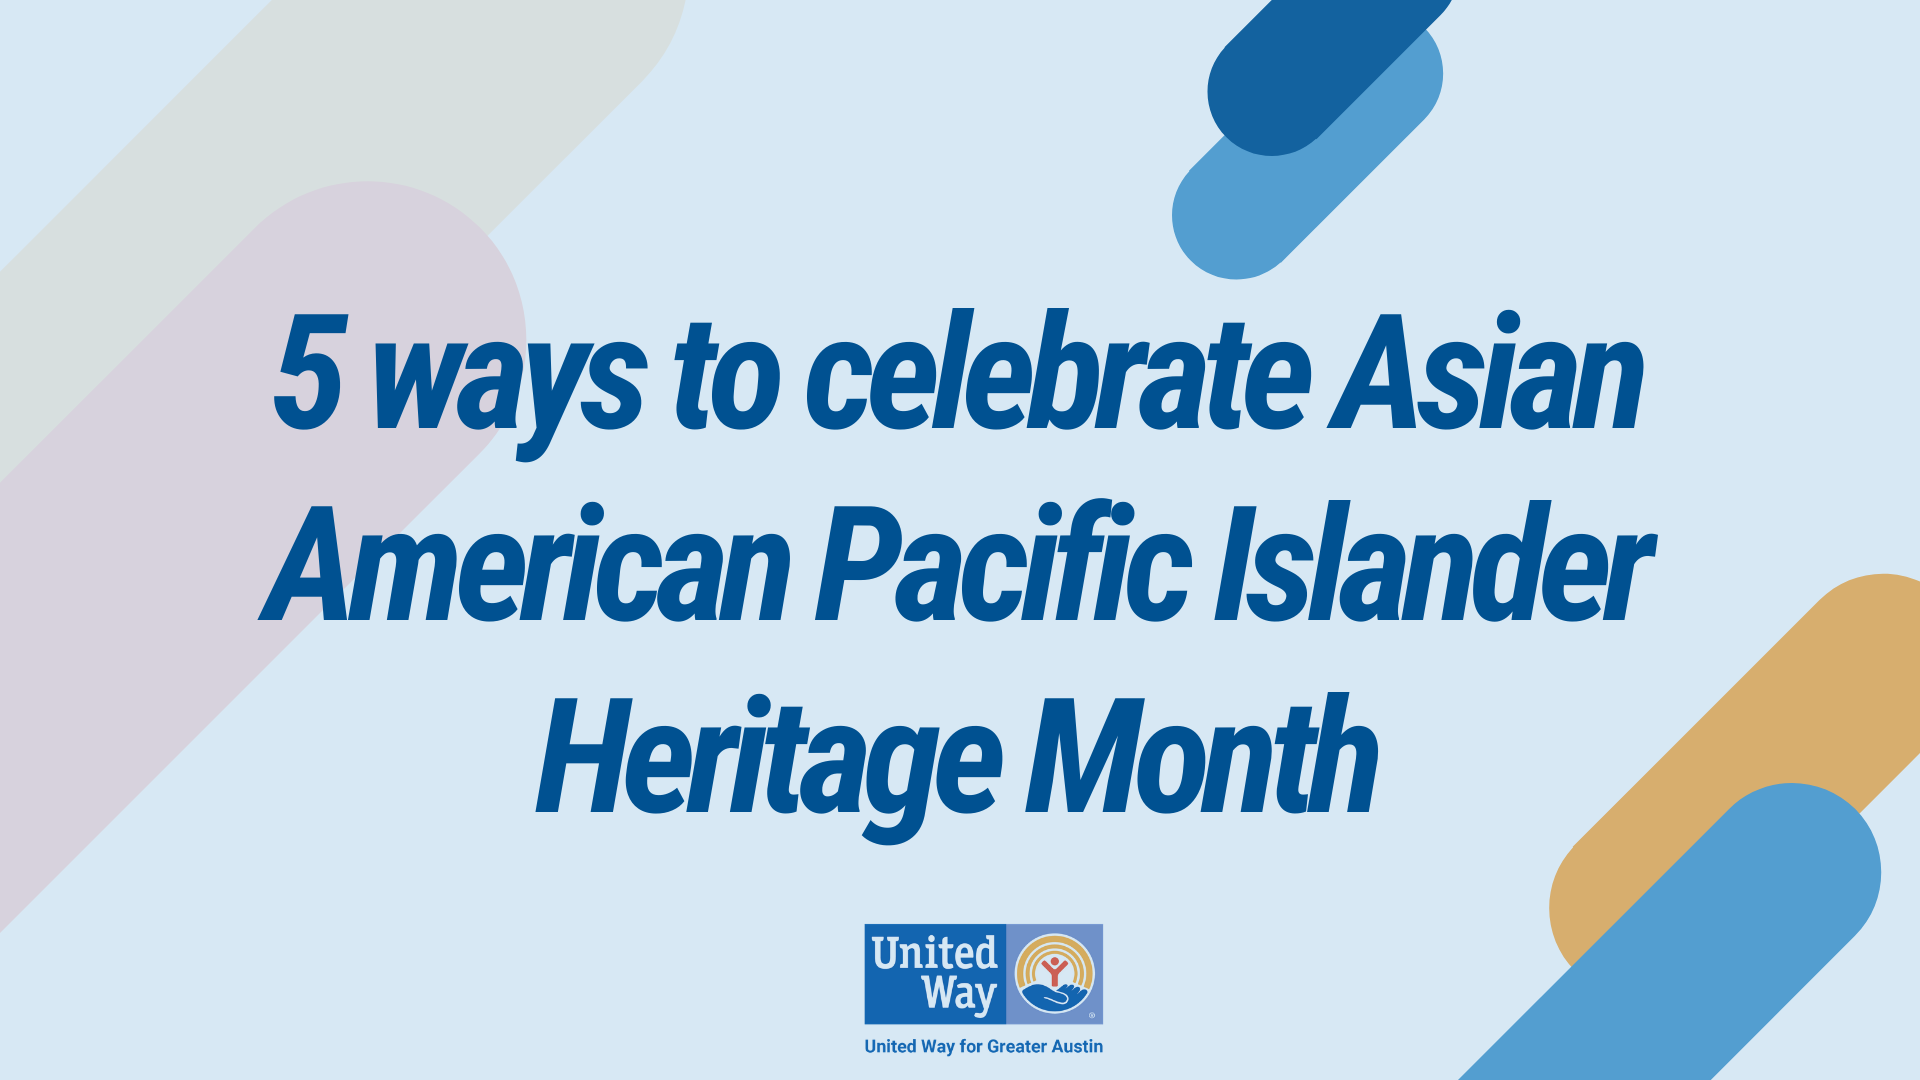 5 Ways to Celebrate Asian American and Pacific Islander Heritage Month